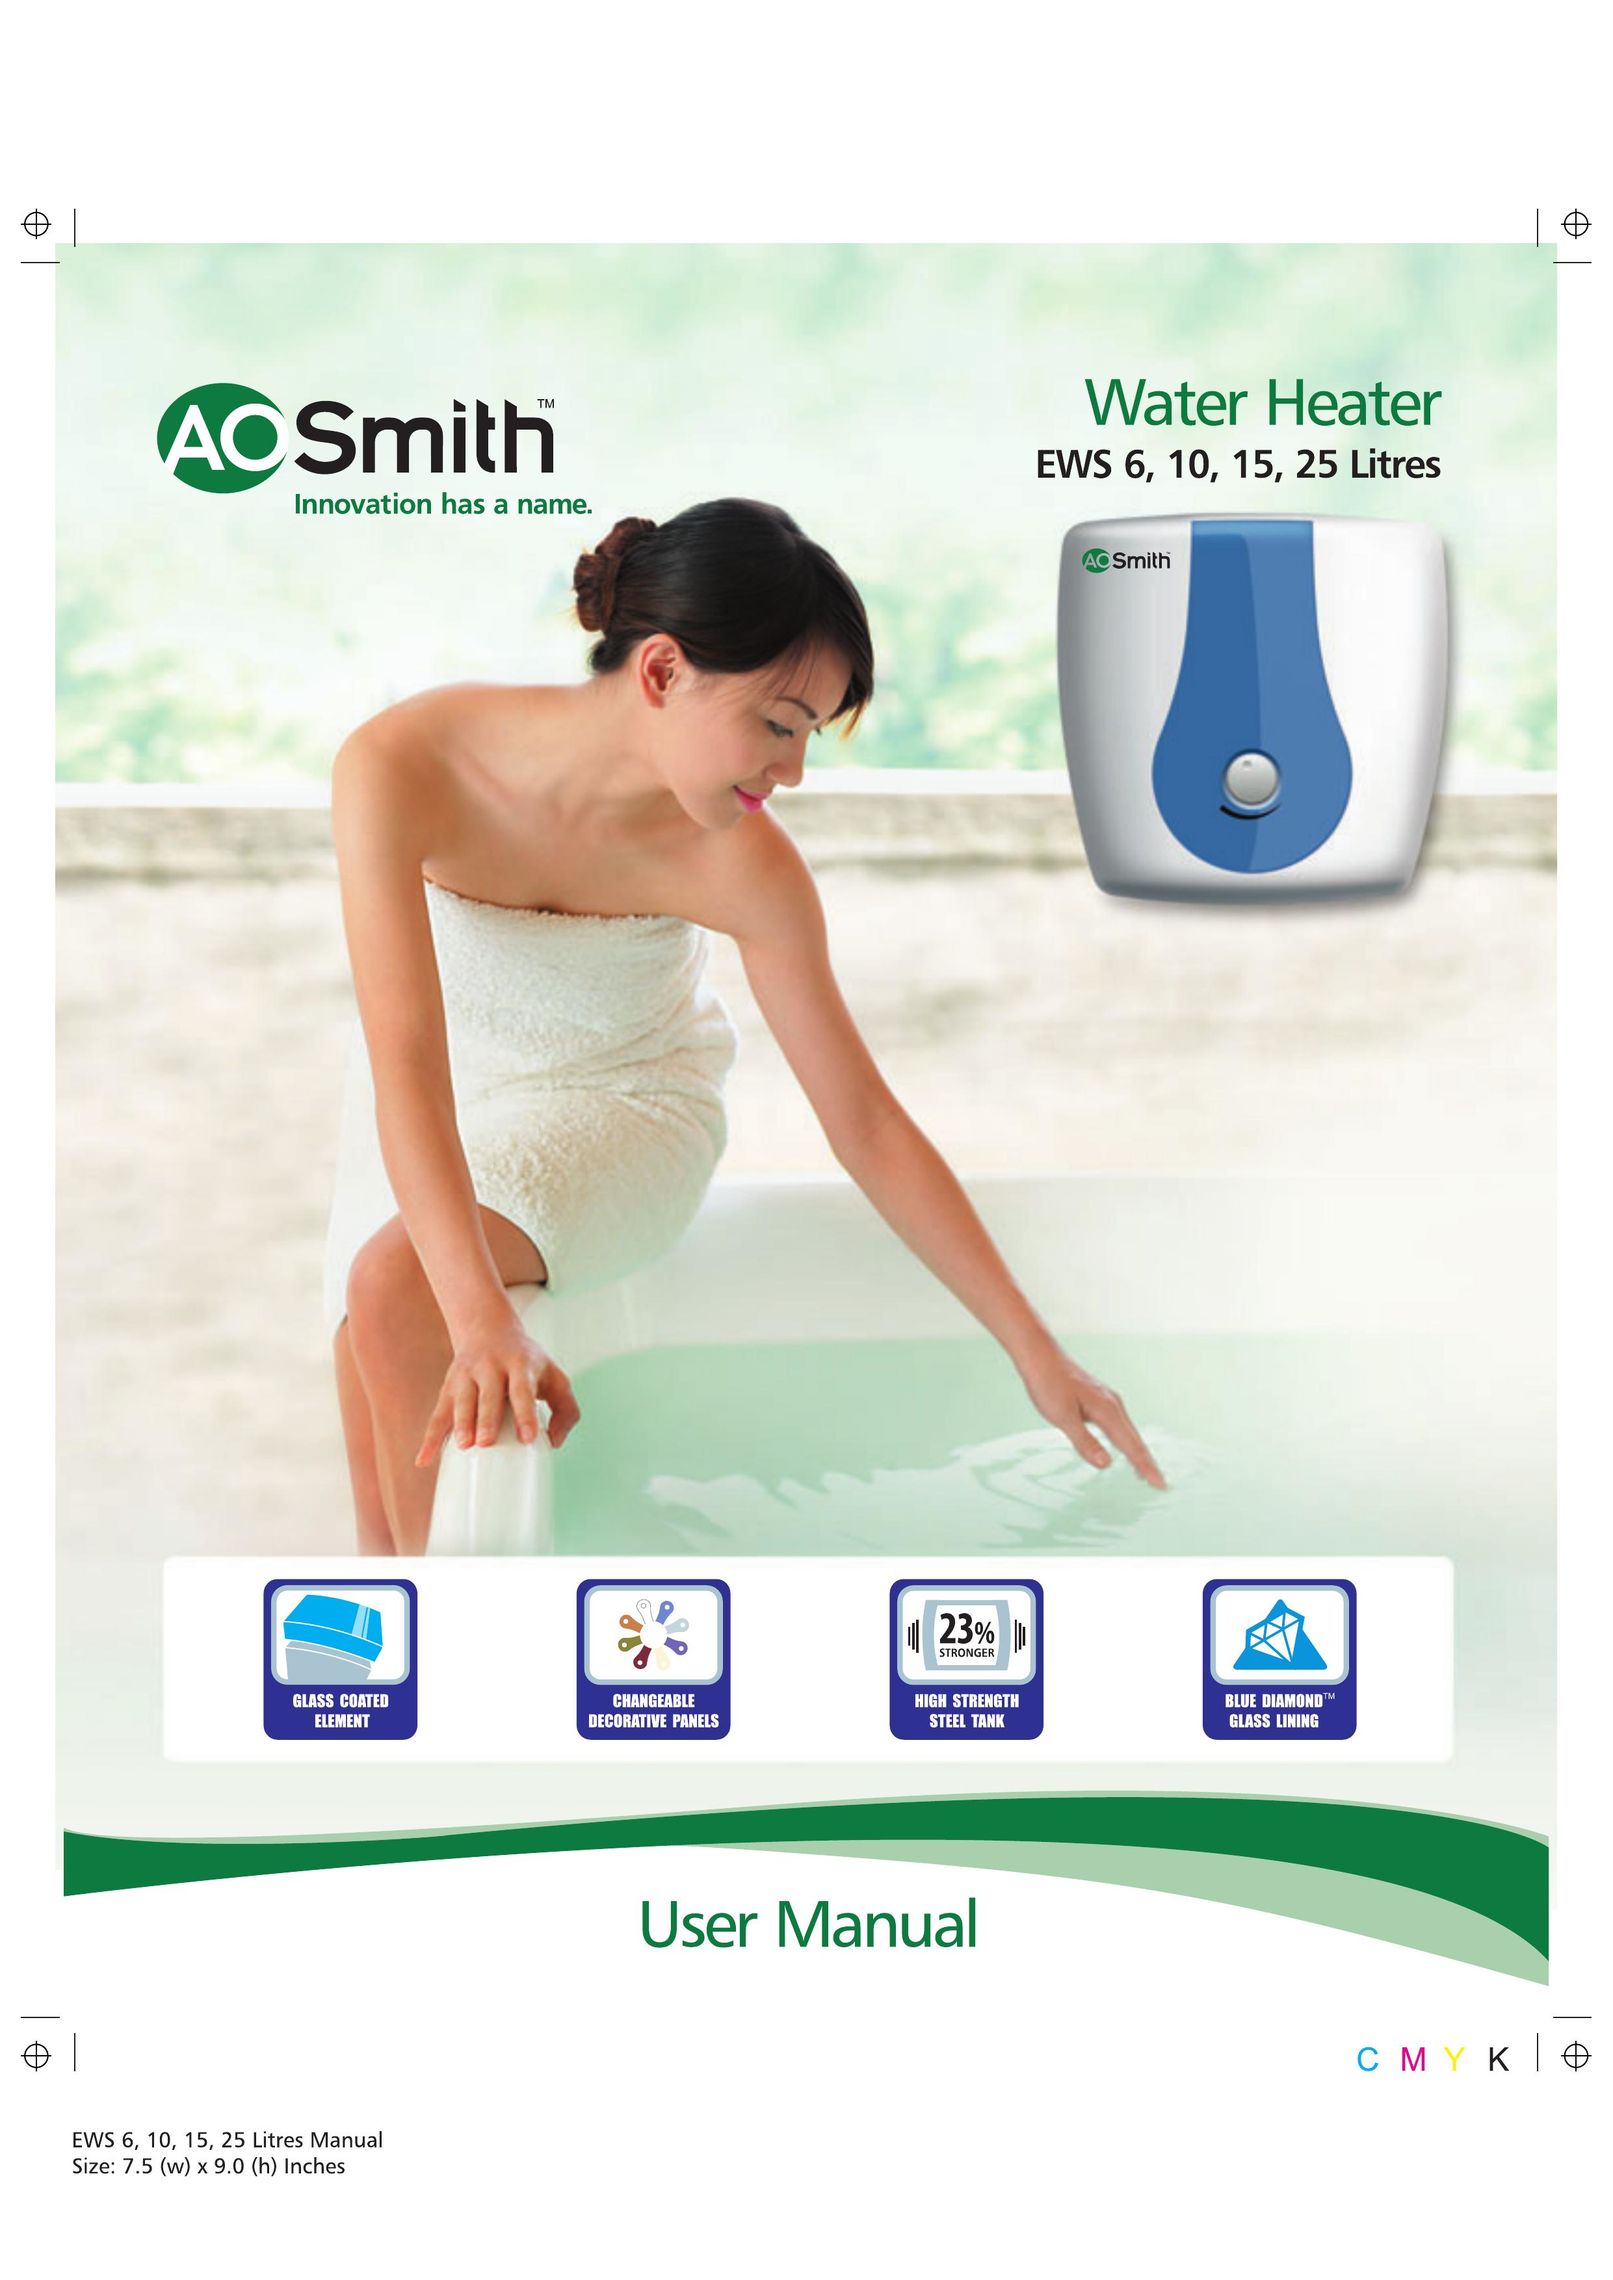 A.O. Smith 25 litres Water Heater User Manual